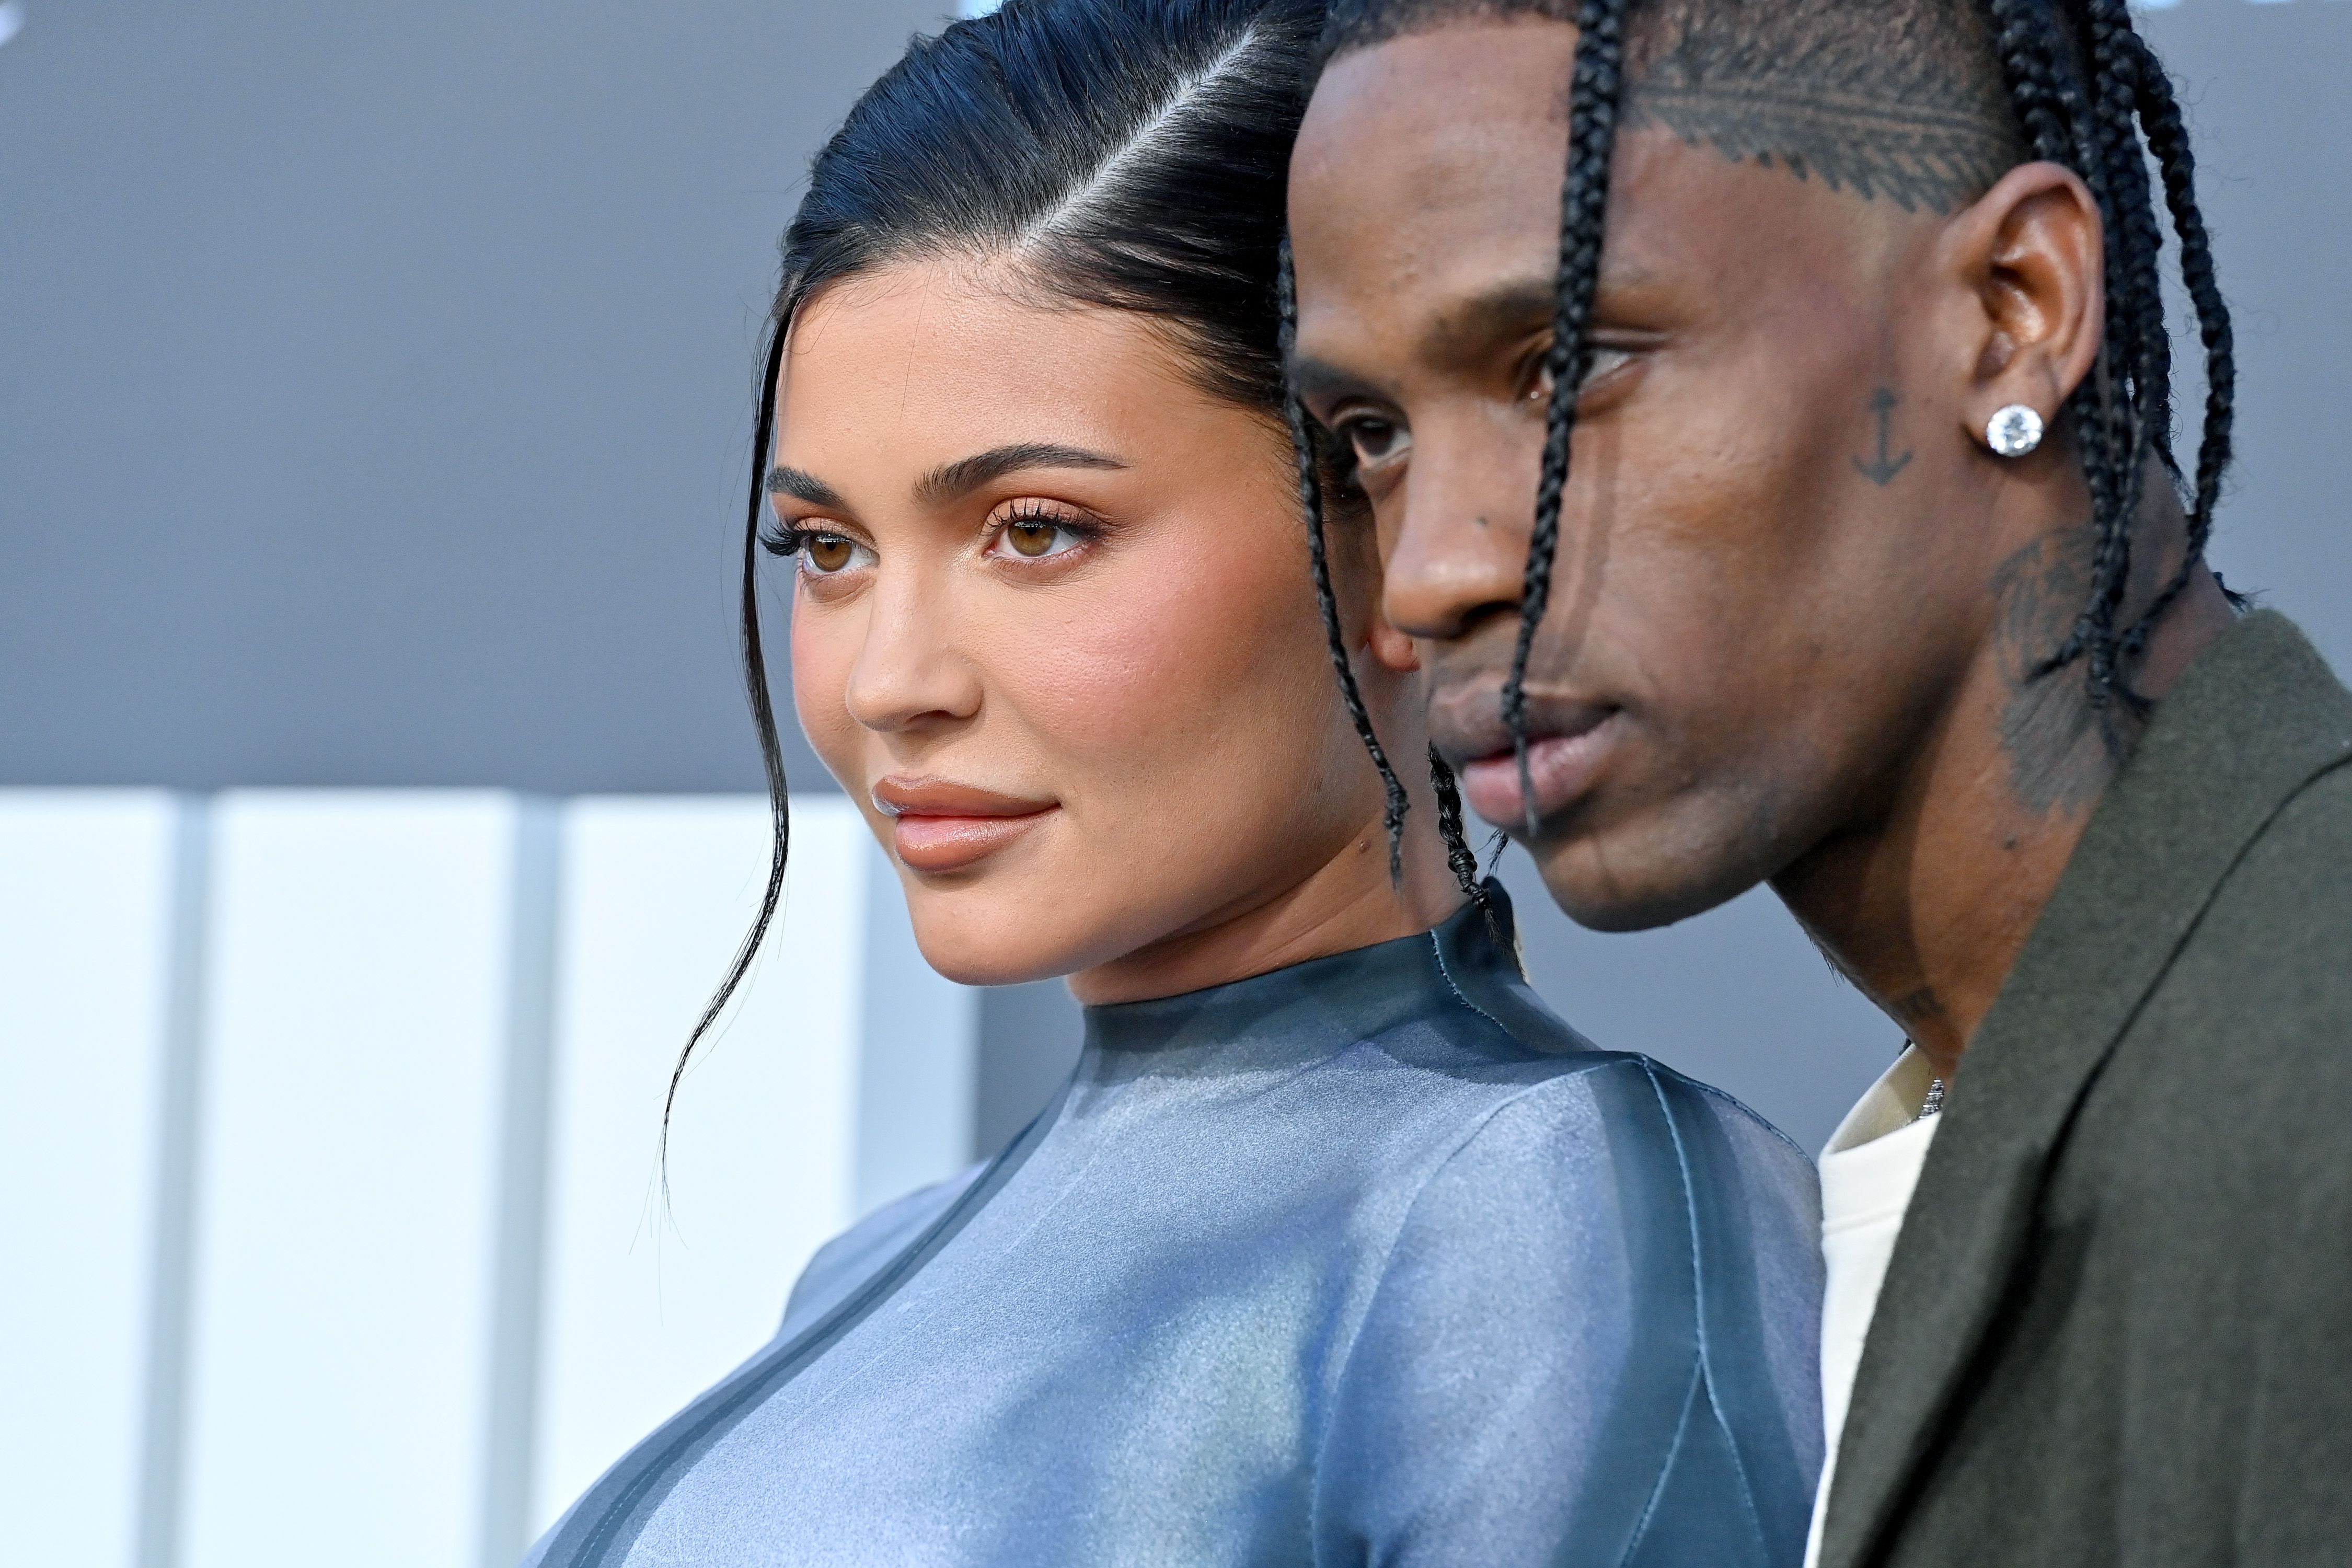 Kylie Page Gangbang Sex Videos - Kylie Jenner and Travis Scott's Relationship Timeline